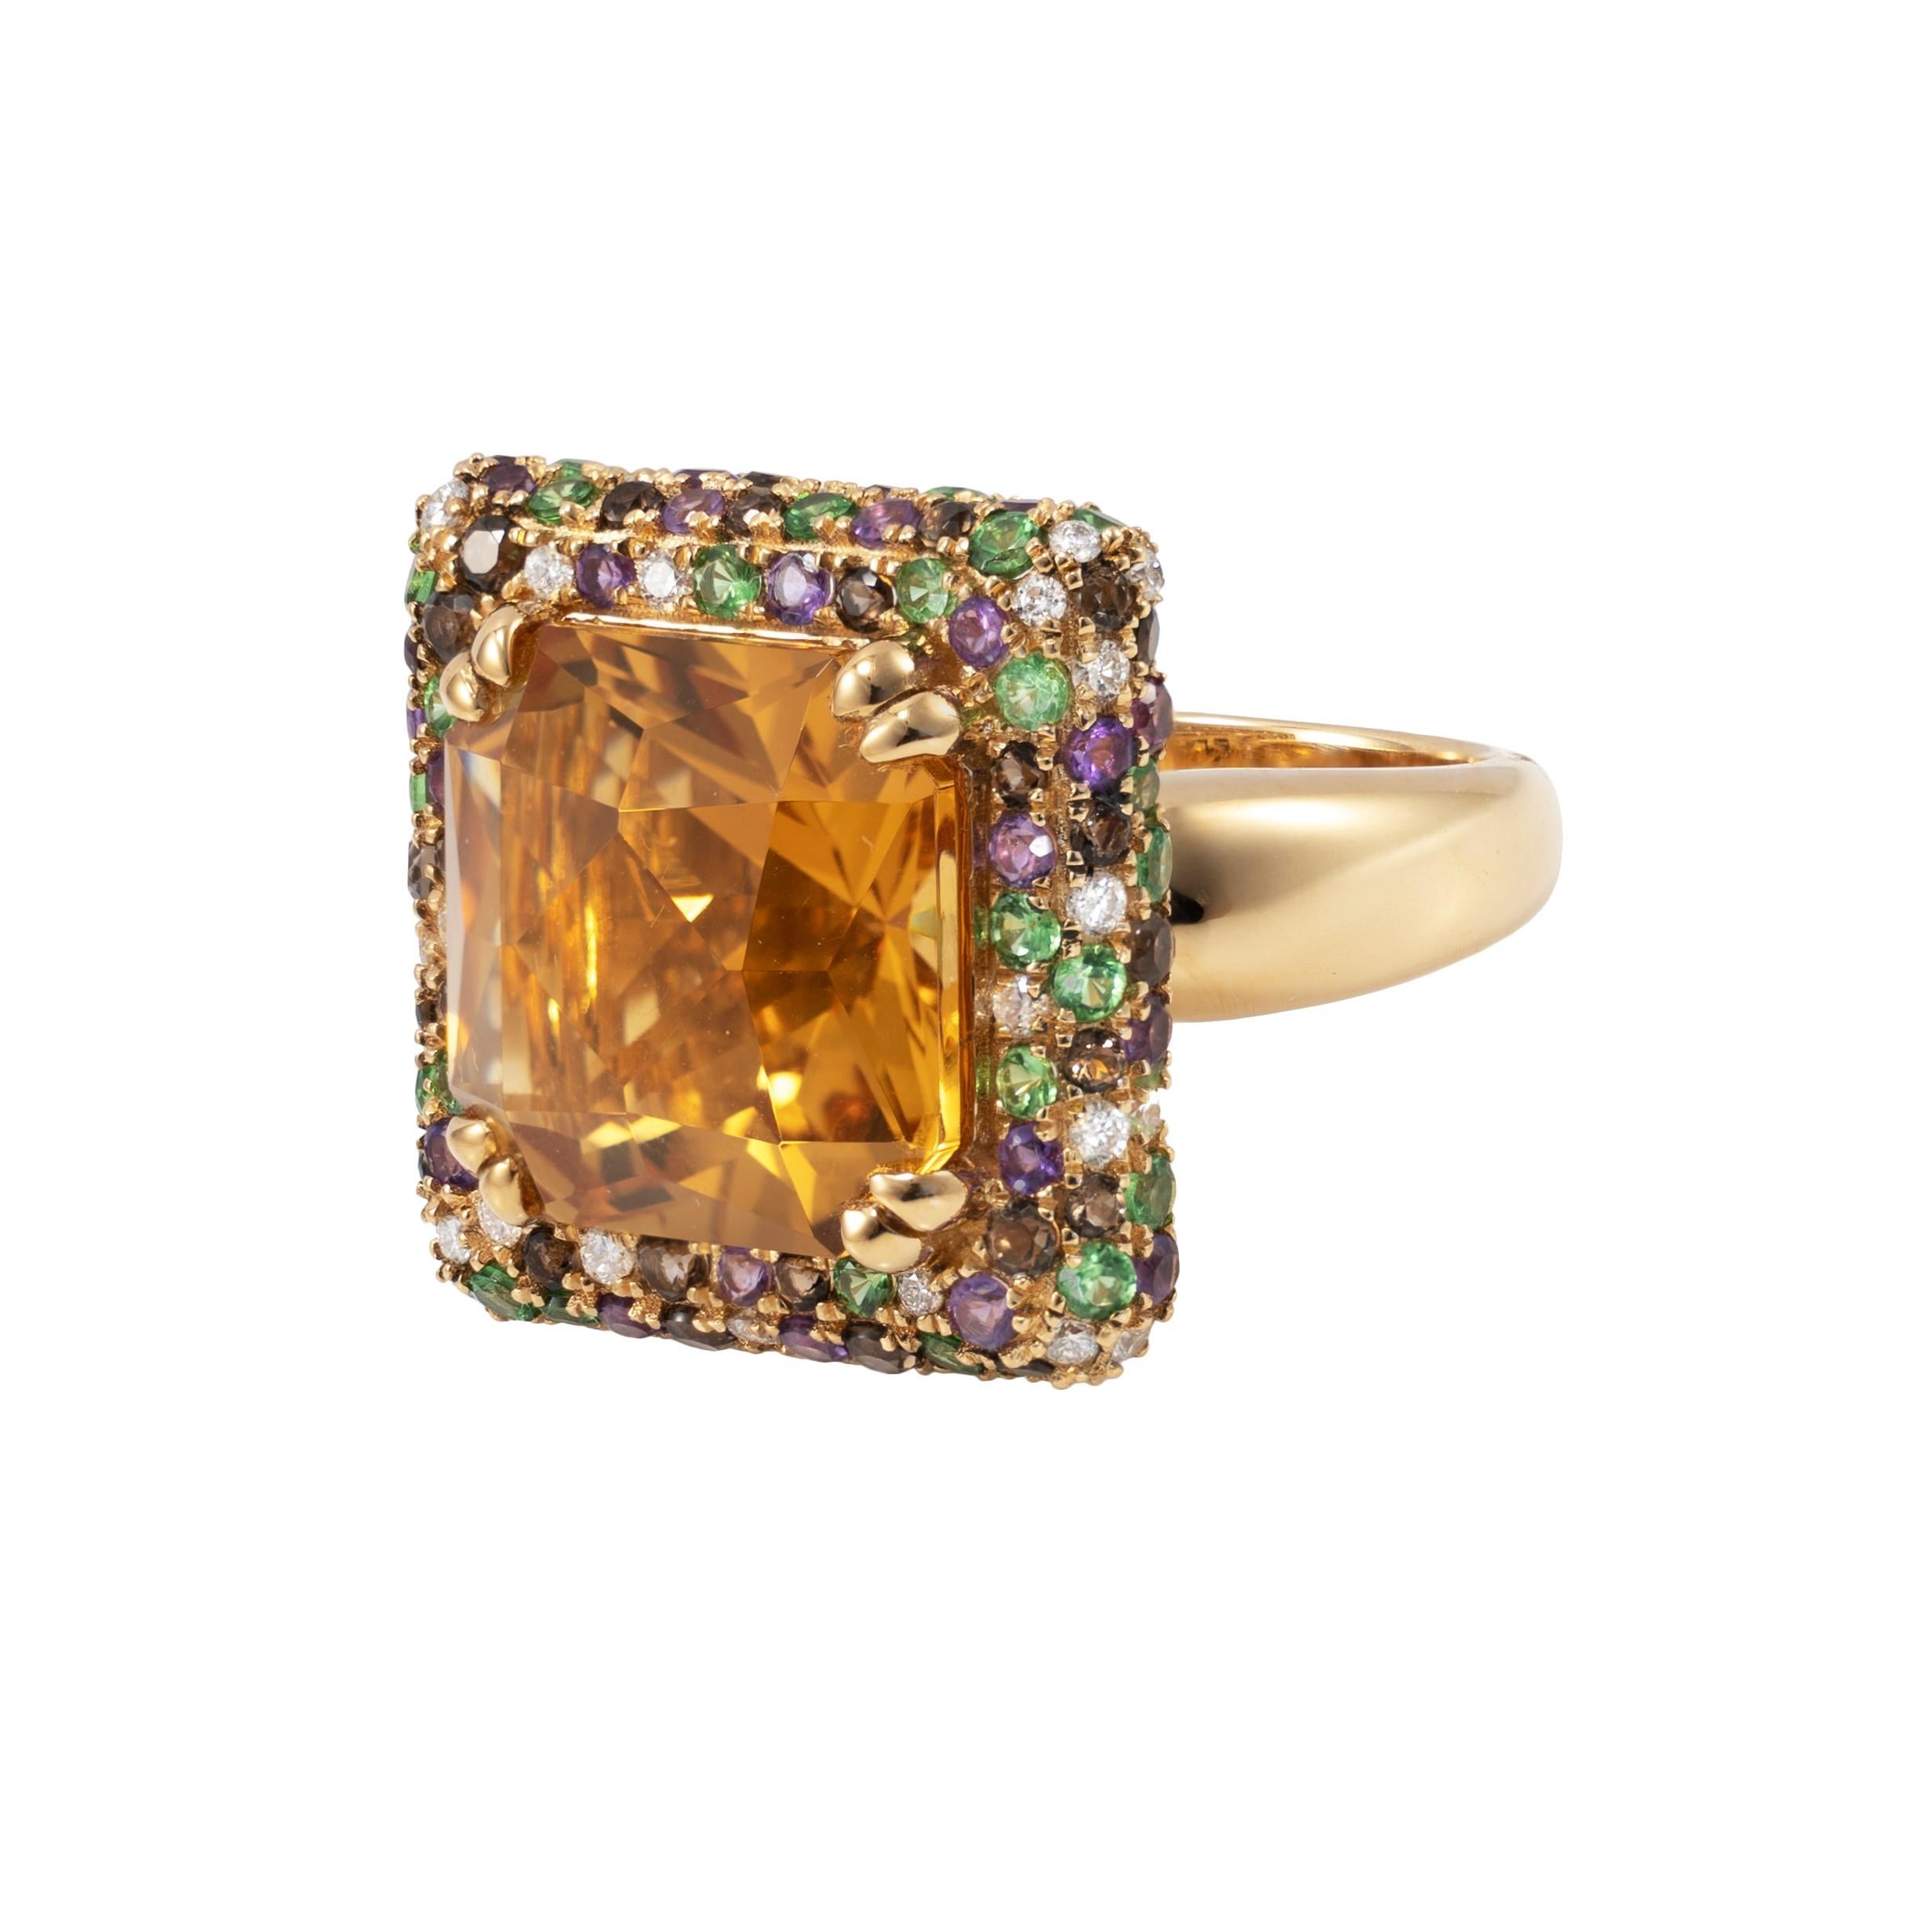 Contemporary Citrine with Gemstones Cocktail Ring in 18 Karat Yellow Gold